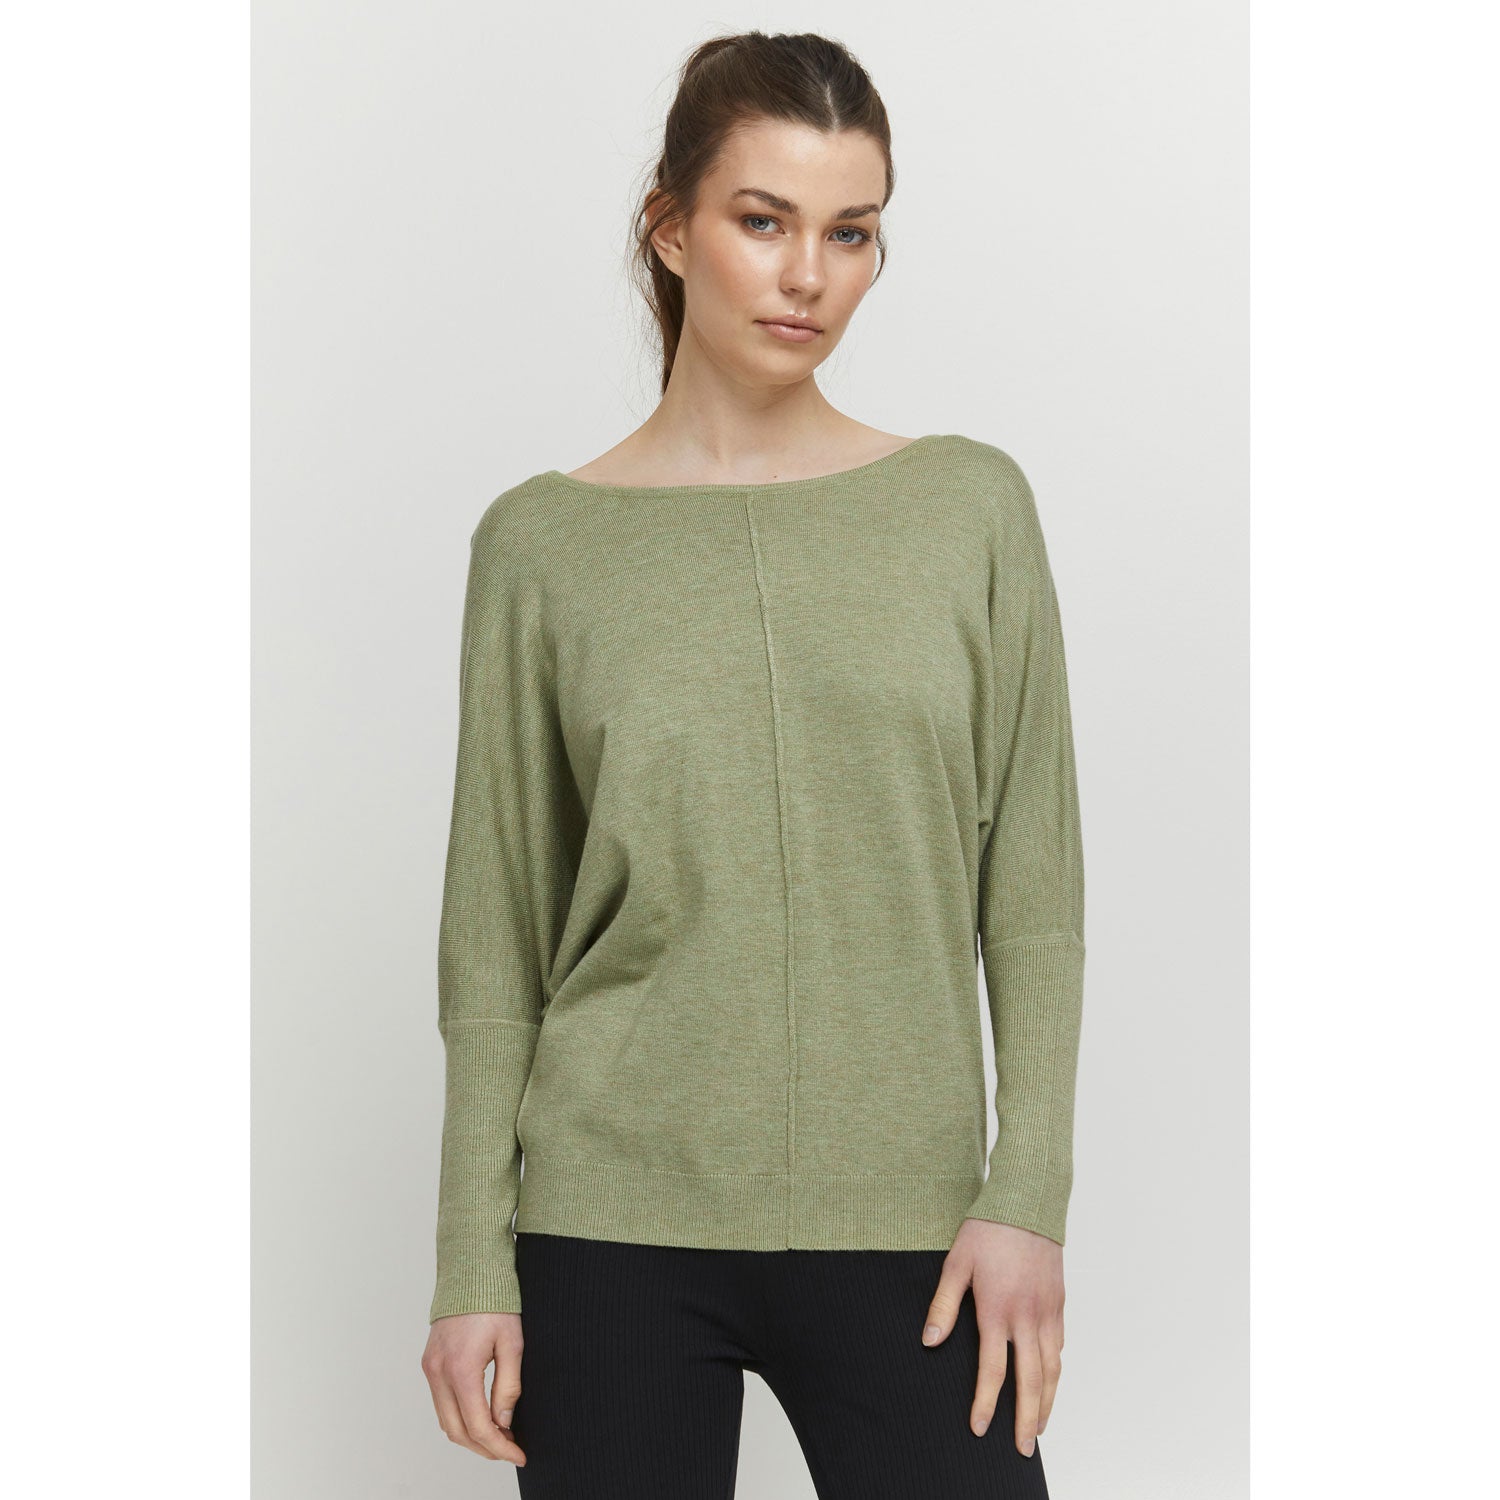 B.young Pimba Batwing Jumper - Sage Green 1 Shaws Department Stores